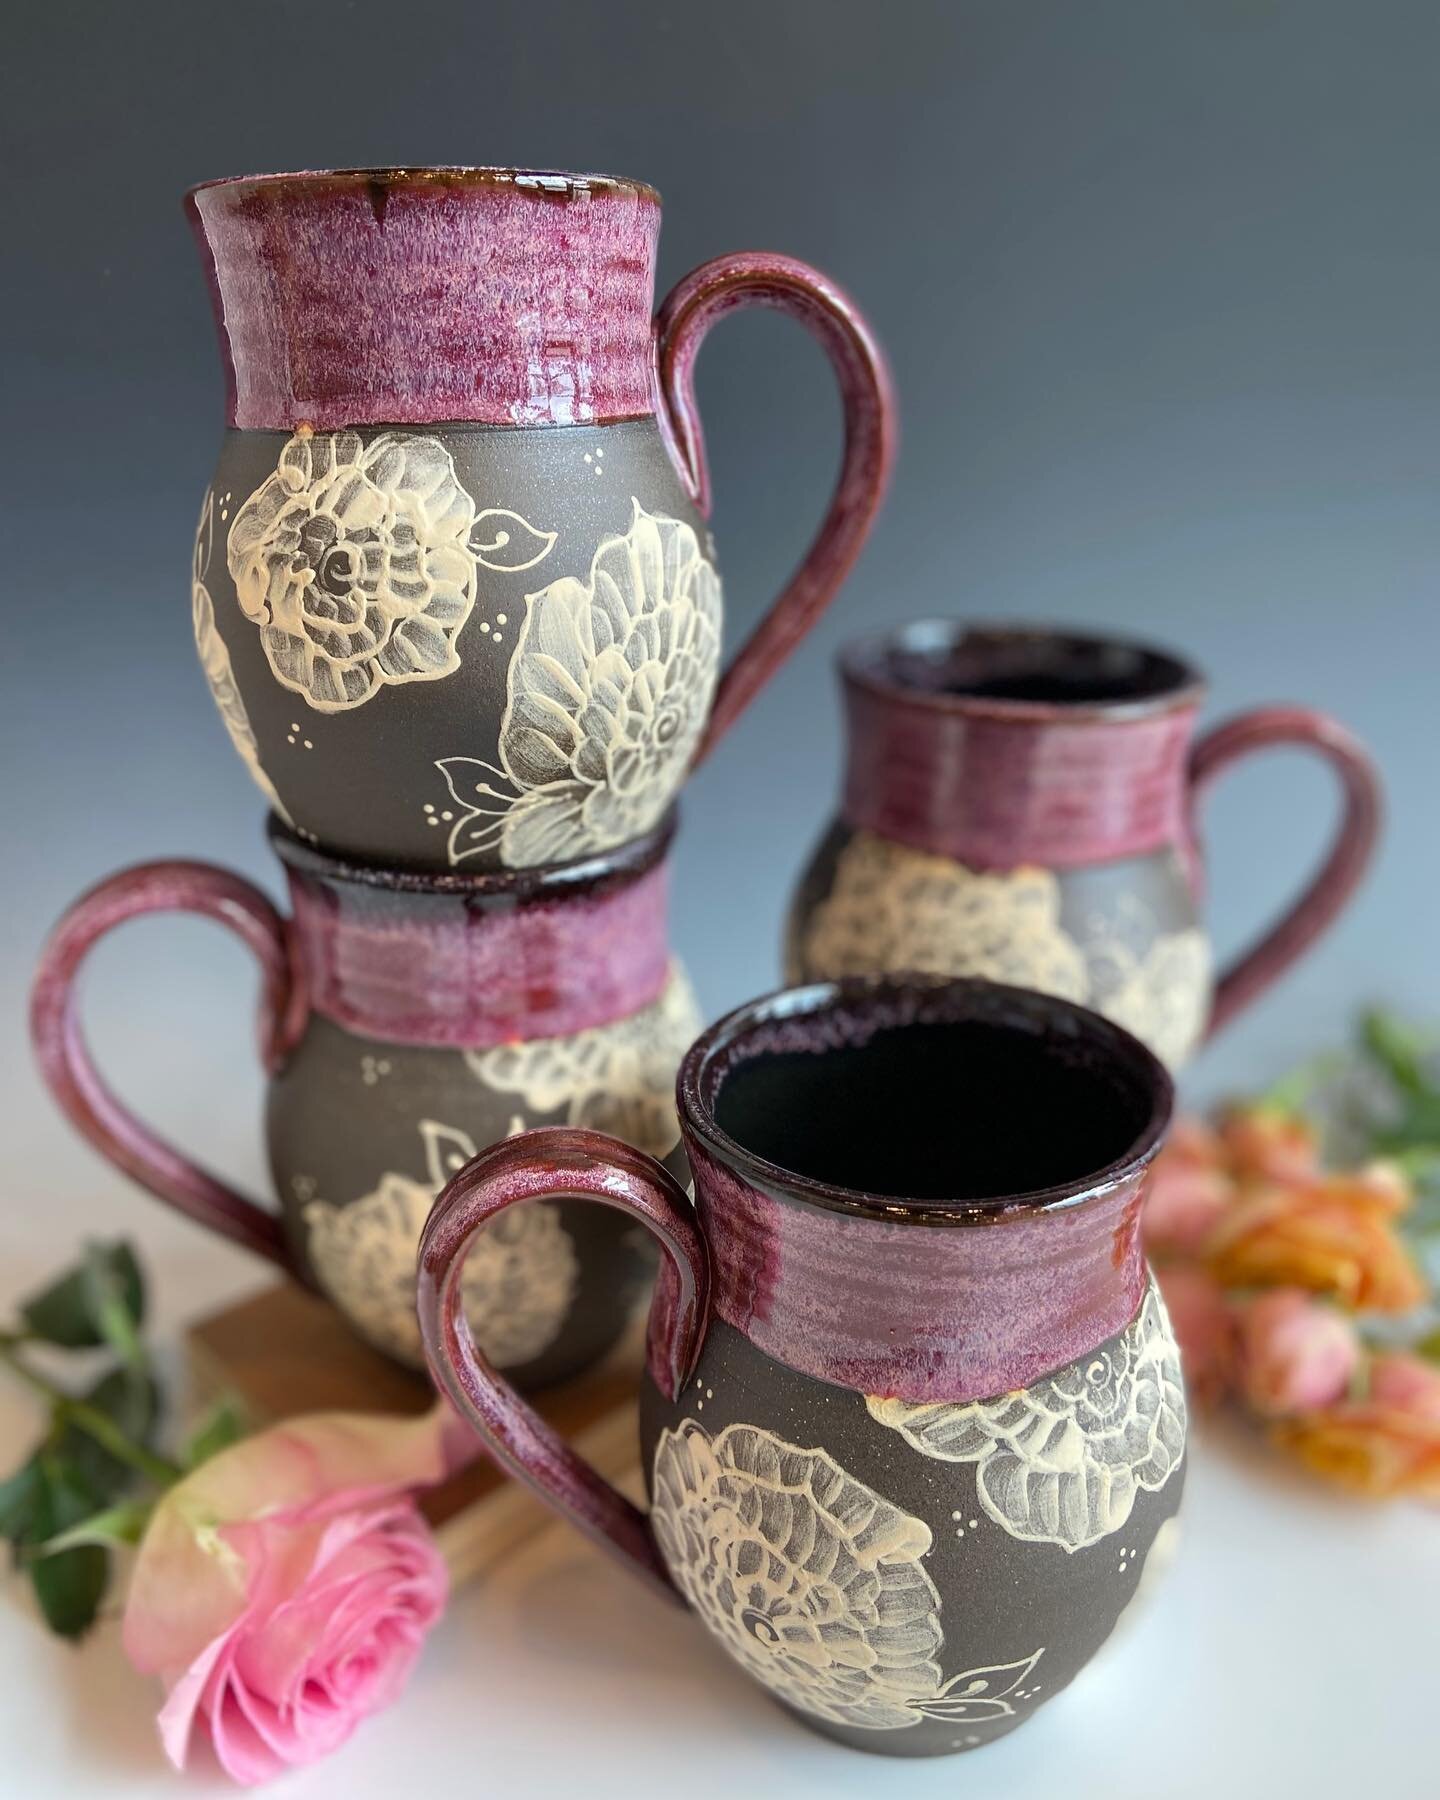 Happy #mugshotmonday on Tuesday because of the Holiday 😜 I&rsquo;ve been a little lazy on posting lately because I&rsquo;ve been a bit busy, but I have new pots in progress and I can&rsquo;t wait to show you soon 😘🌹 I currently have a few rose mug